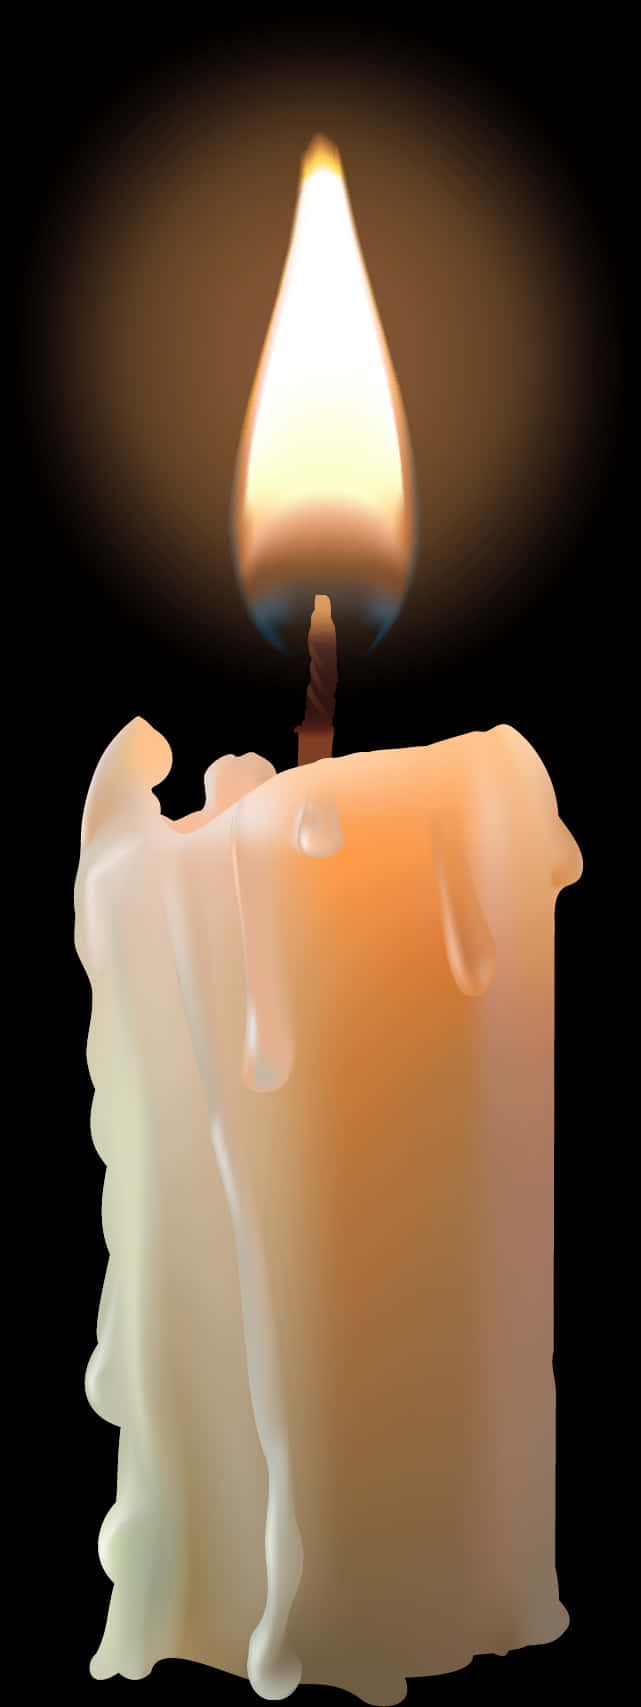 Flames On Candle